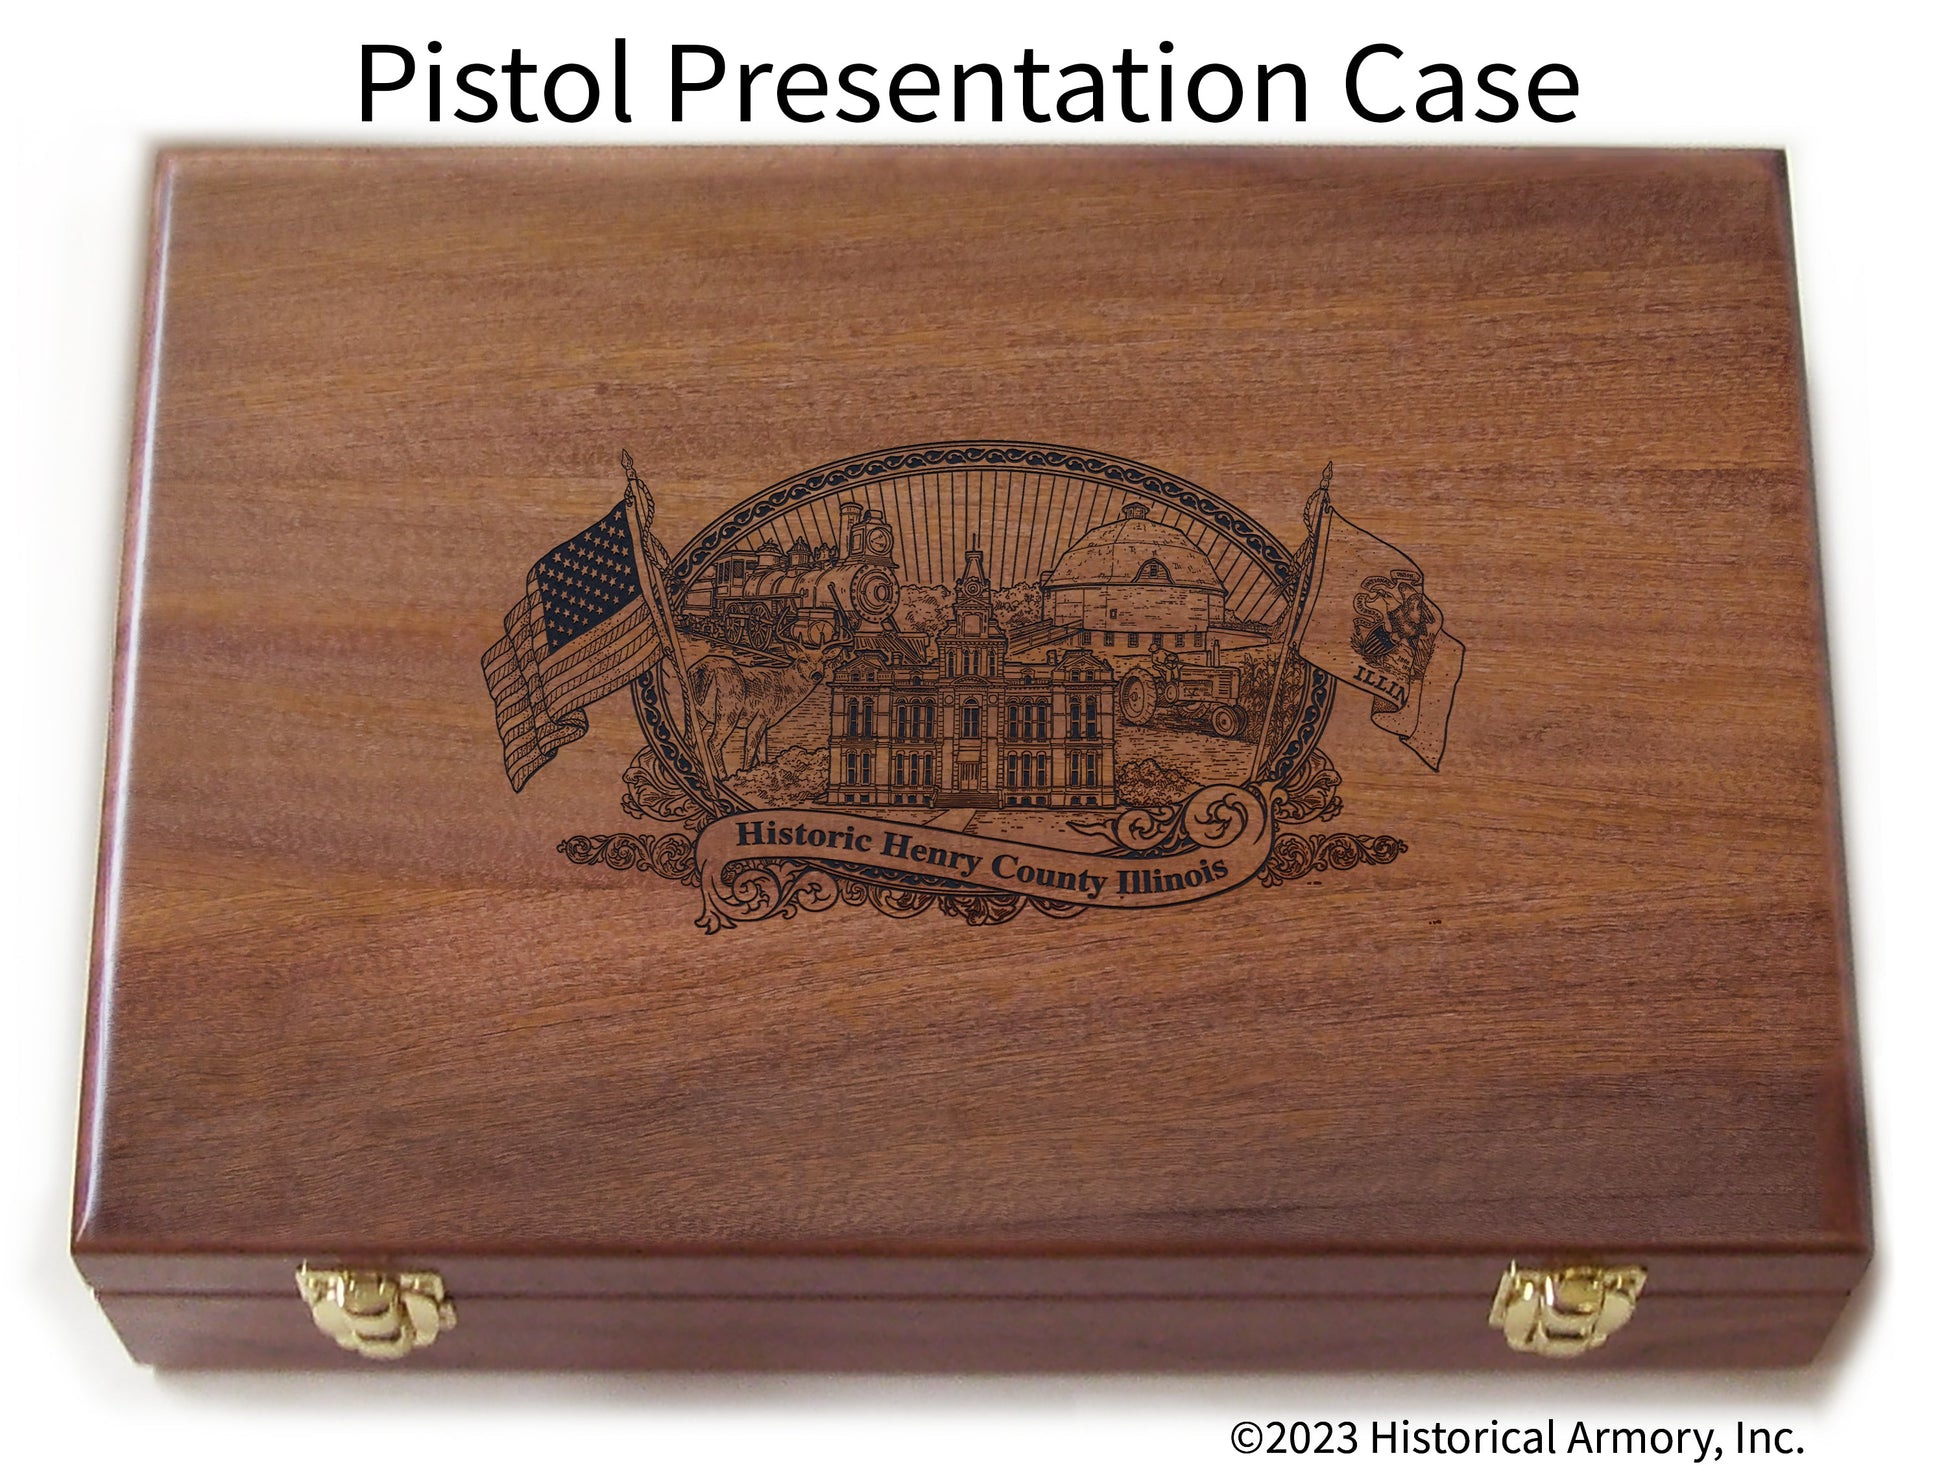 Henry County Illinois Engraved .45 Auto Ruger 1911 Presentation Case